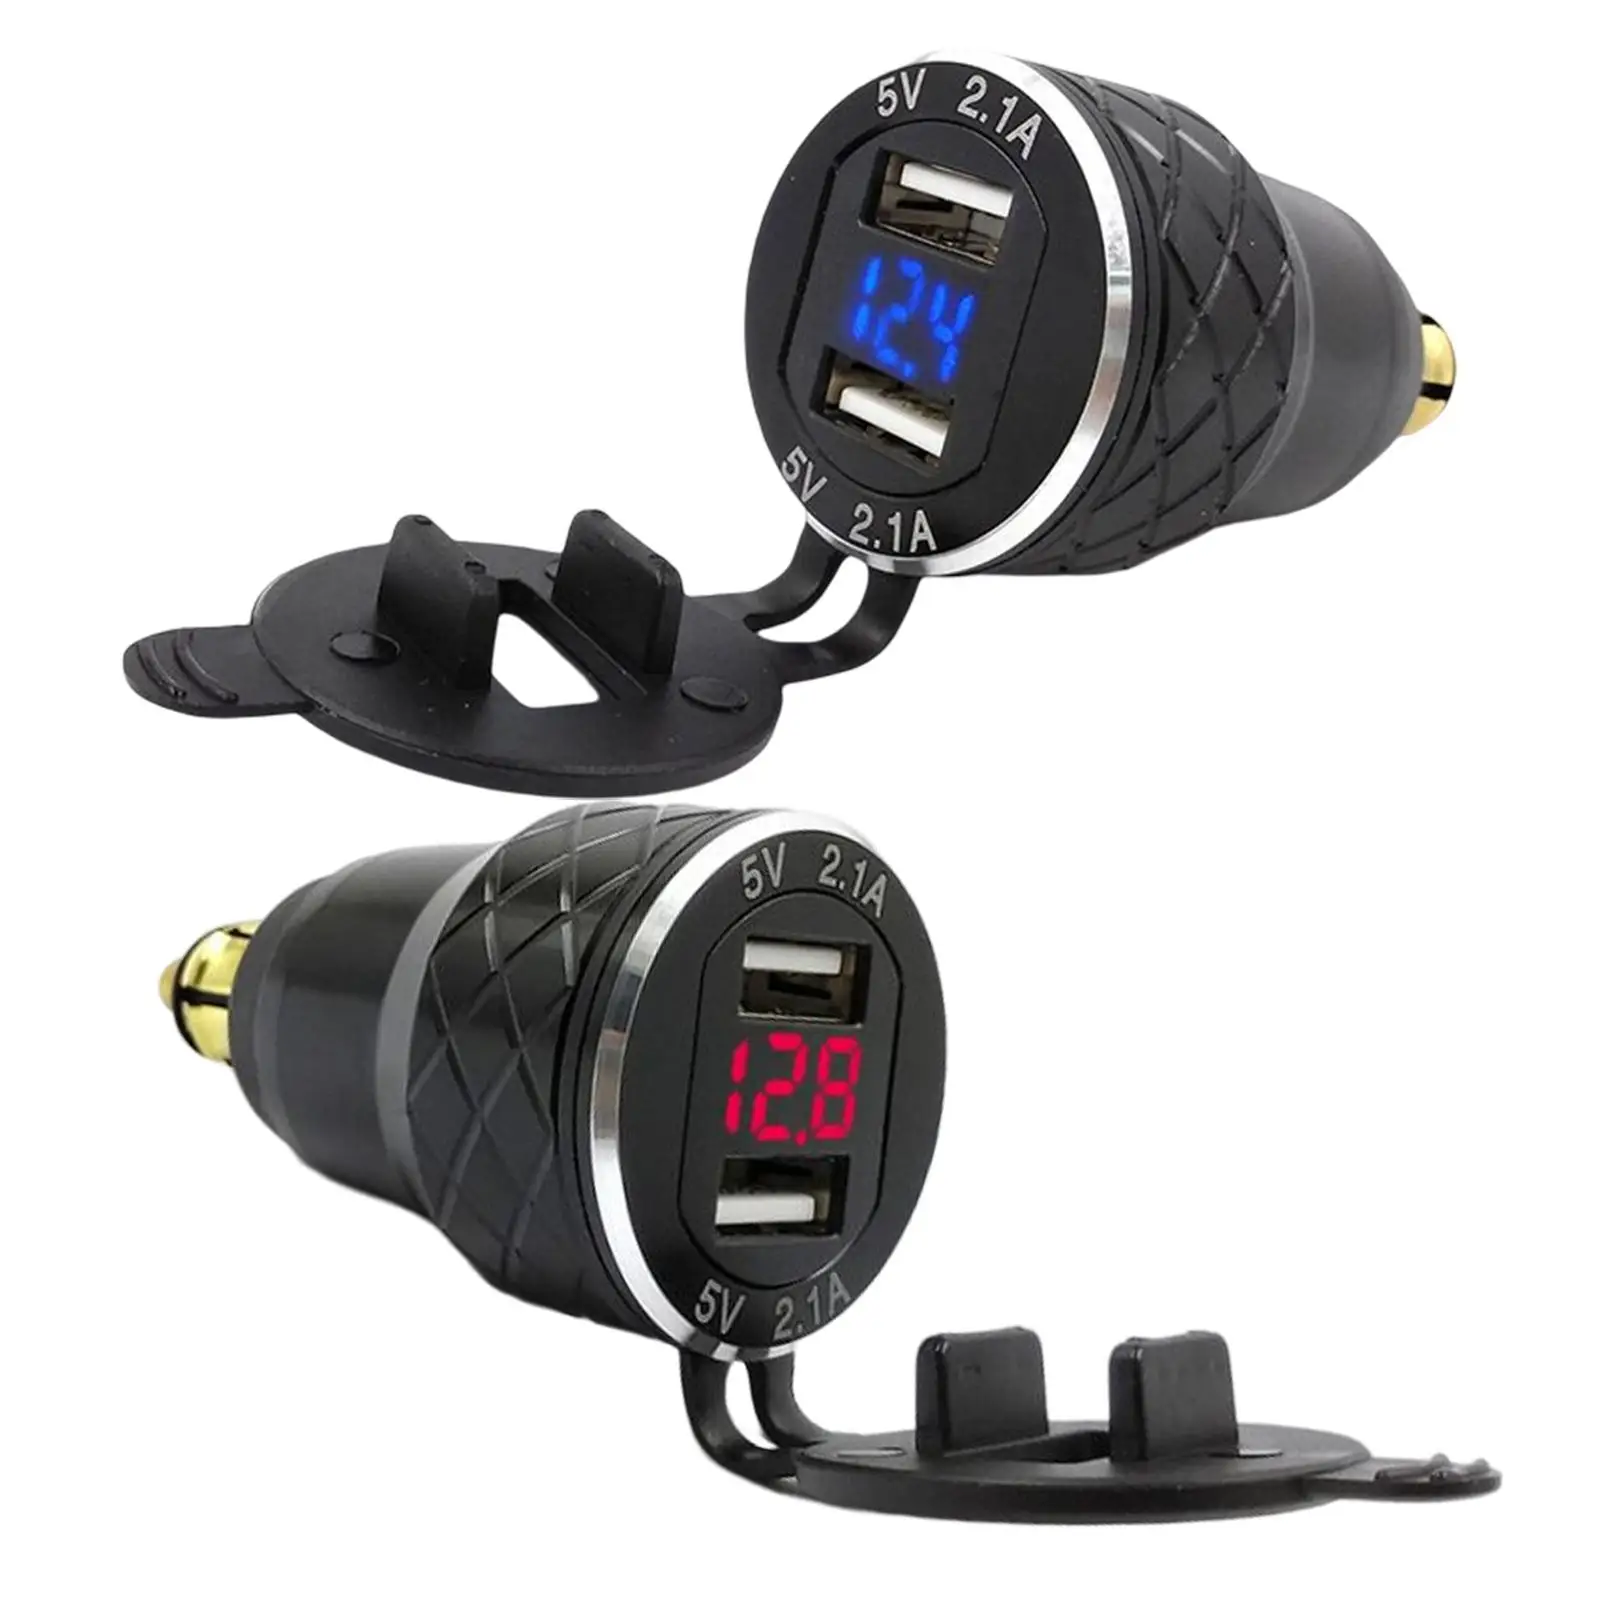 Motorcycle Dual USB Charger LED Display Fast Charge Aluminum 12V-24V Voltmeter Phone Type: EU USB Adapter Fit for Universal